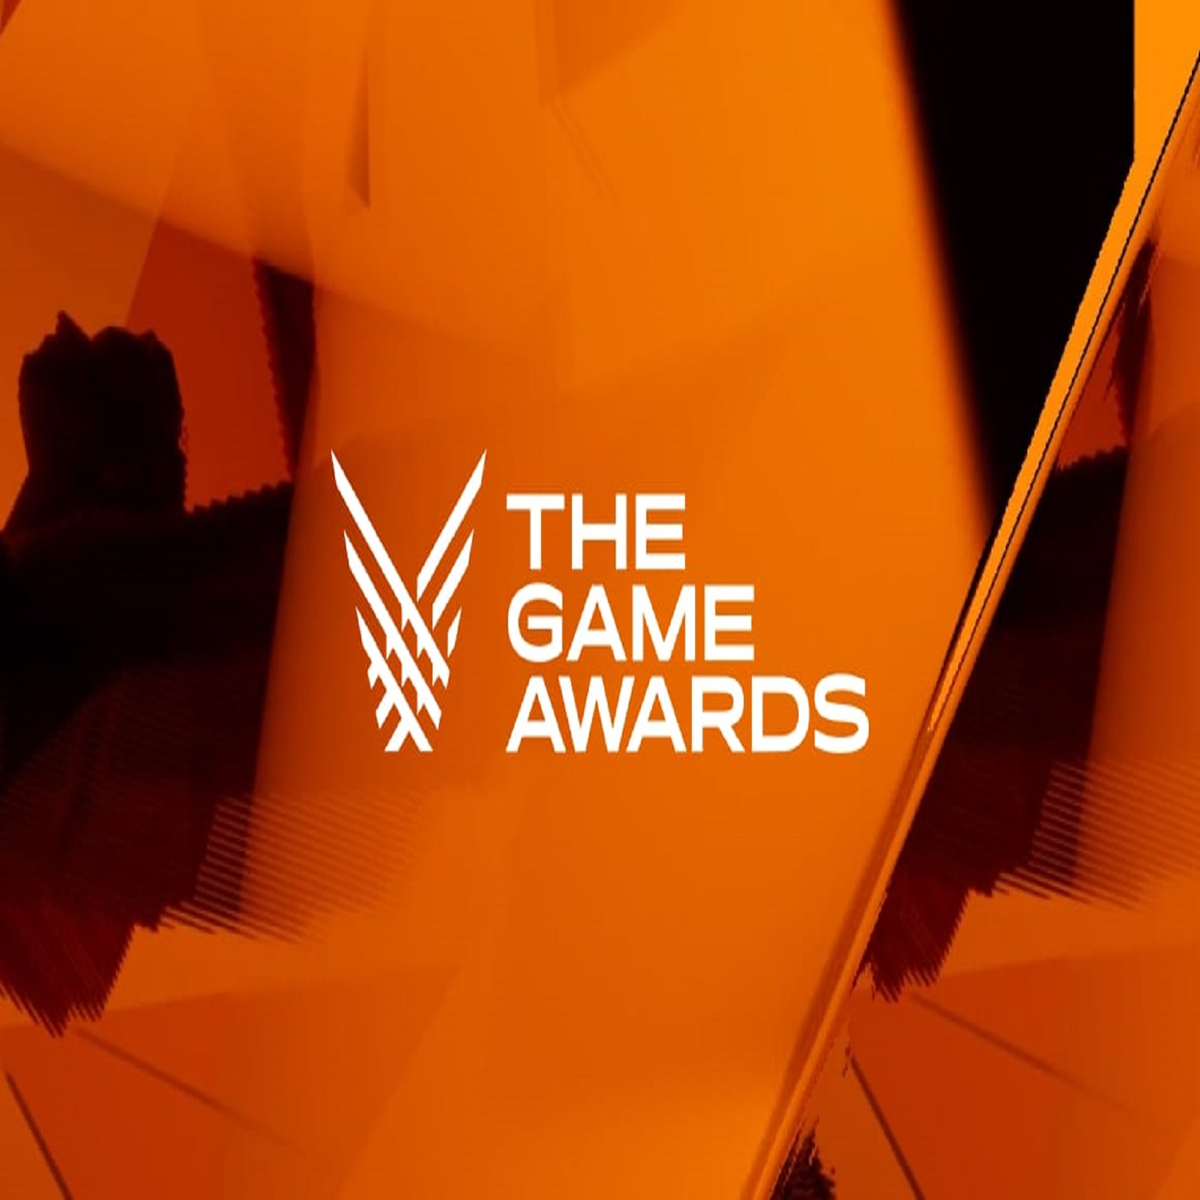 The Game Awards 2022: Start time, how to watch and predictions